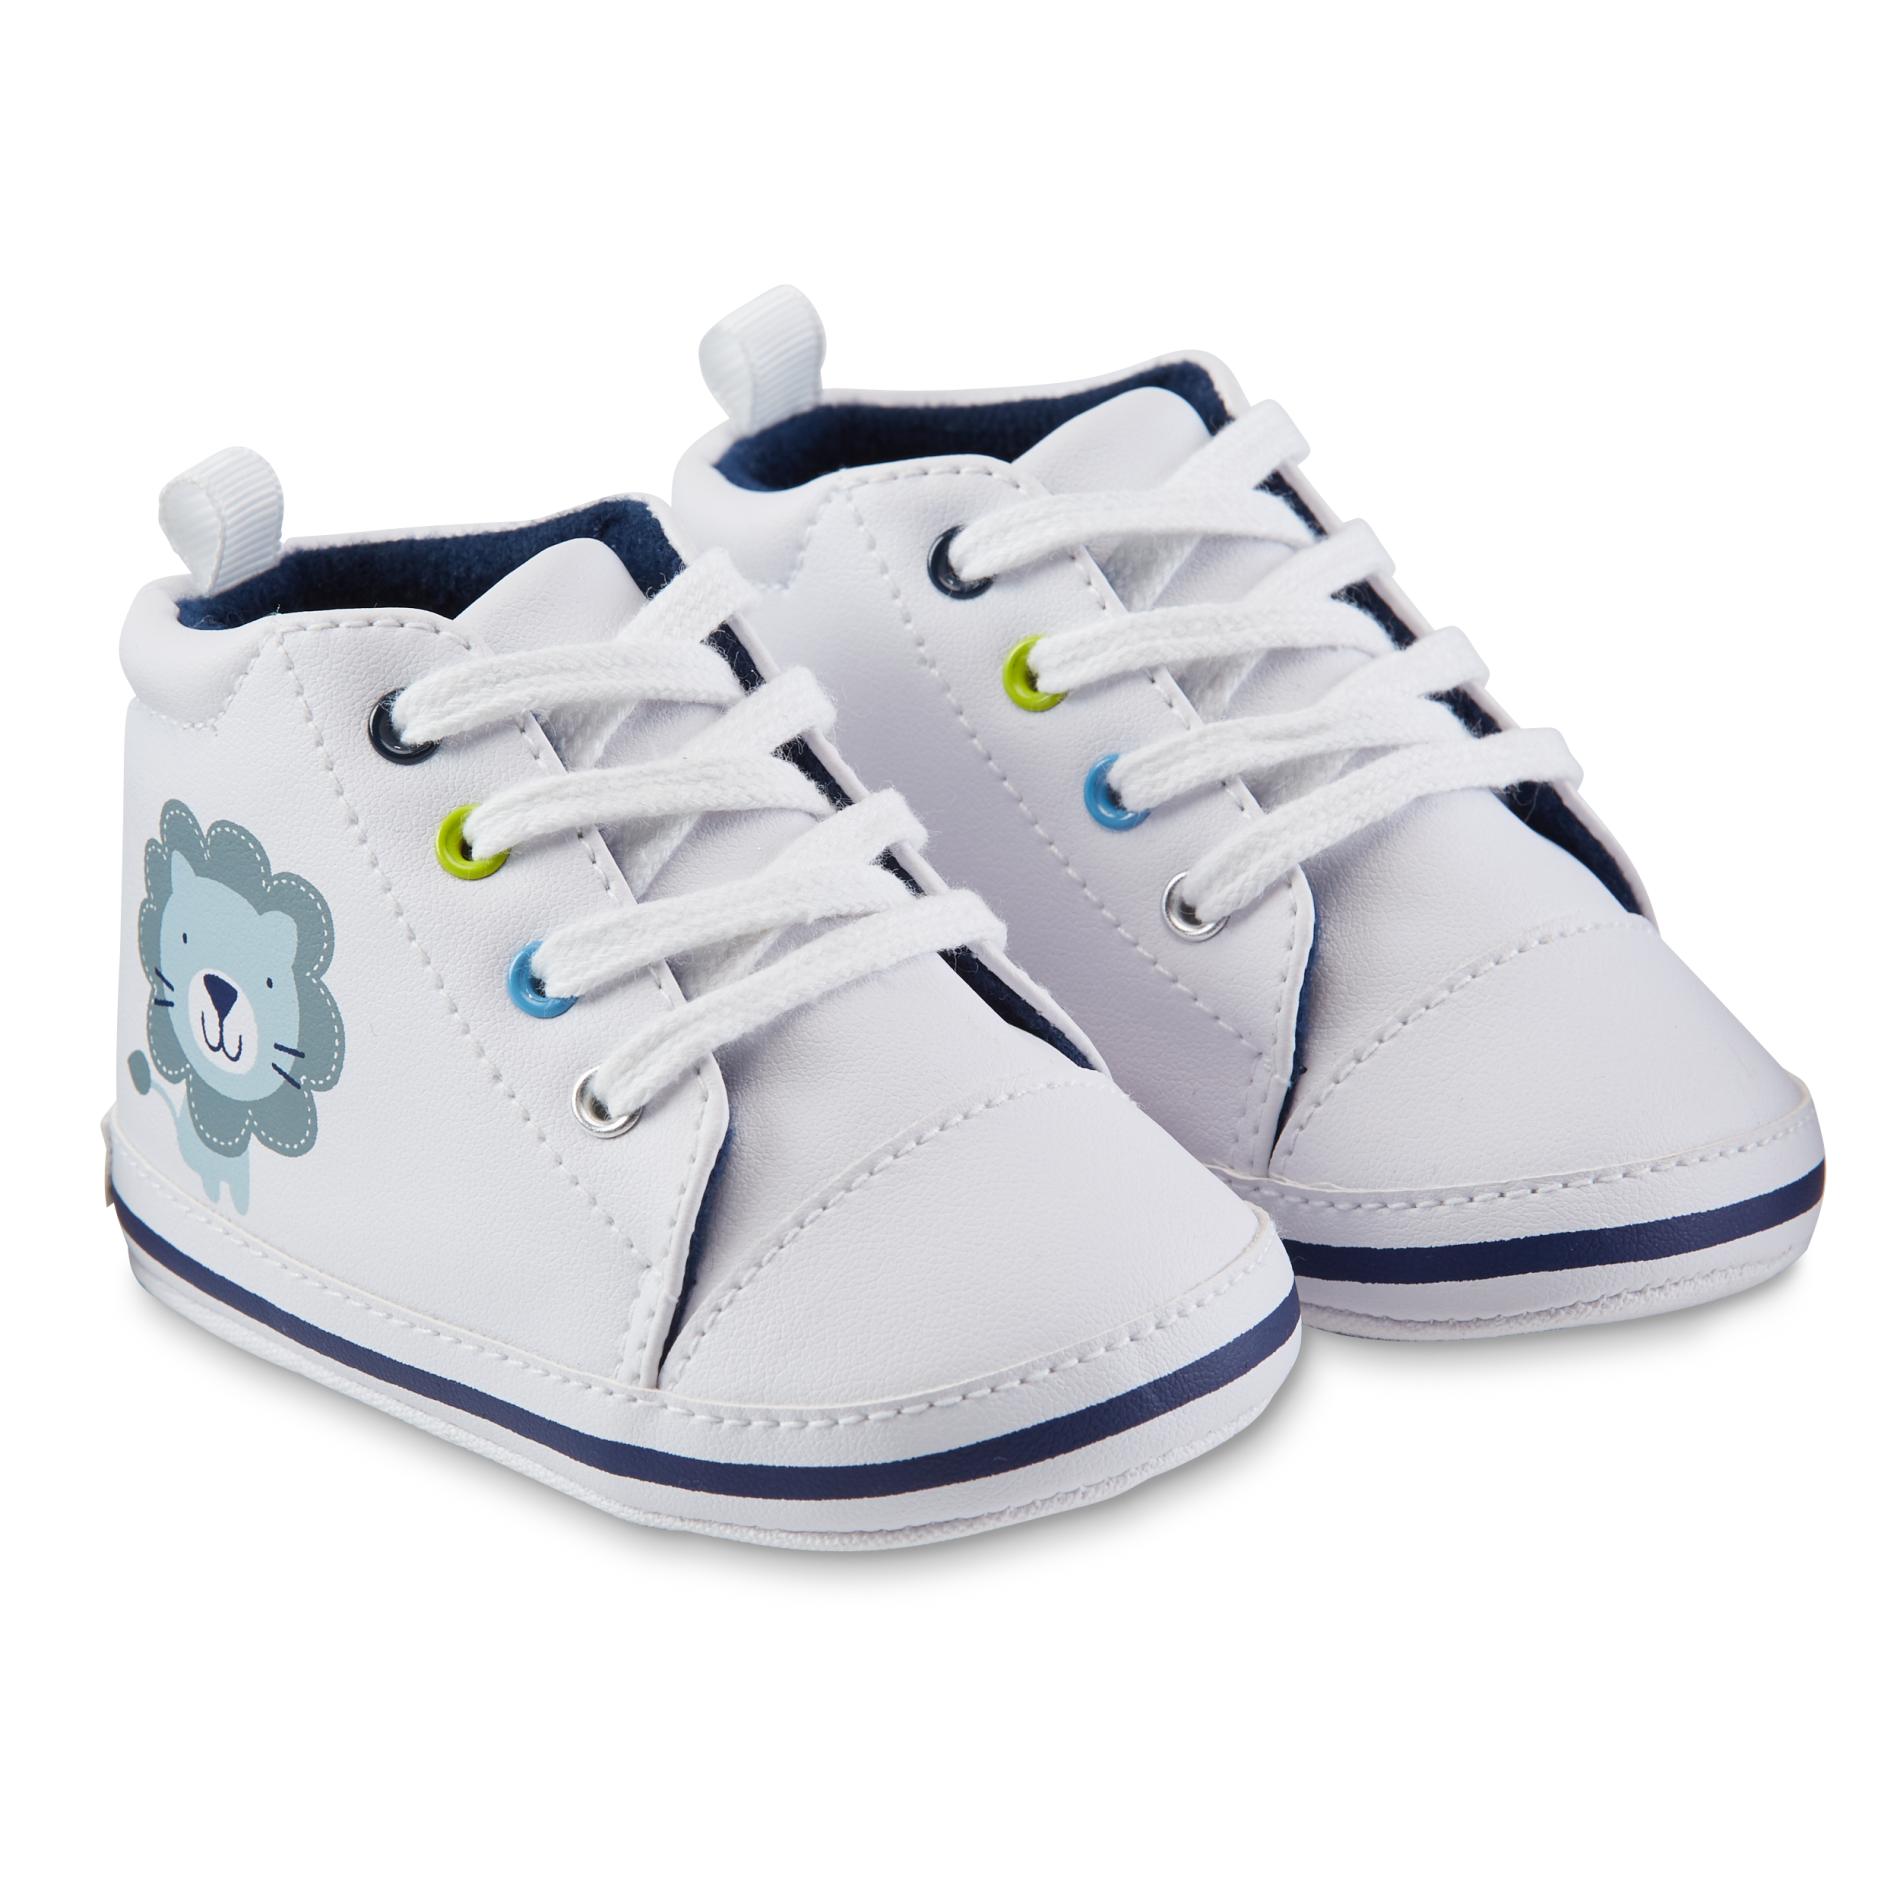 Gerber Baby Boy's Lace-Up Sneaker - White/Blue/Lion